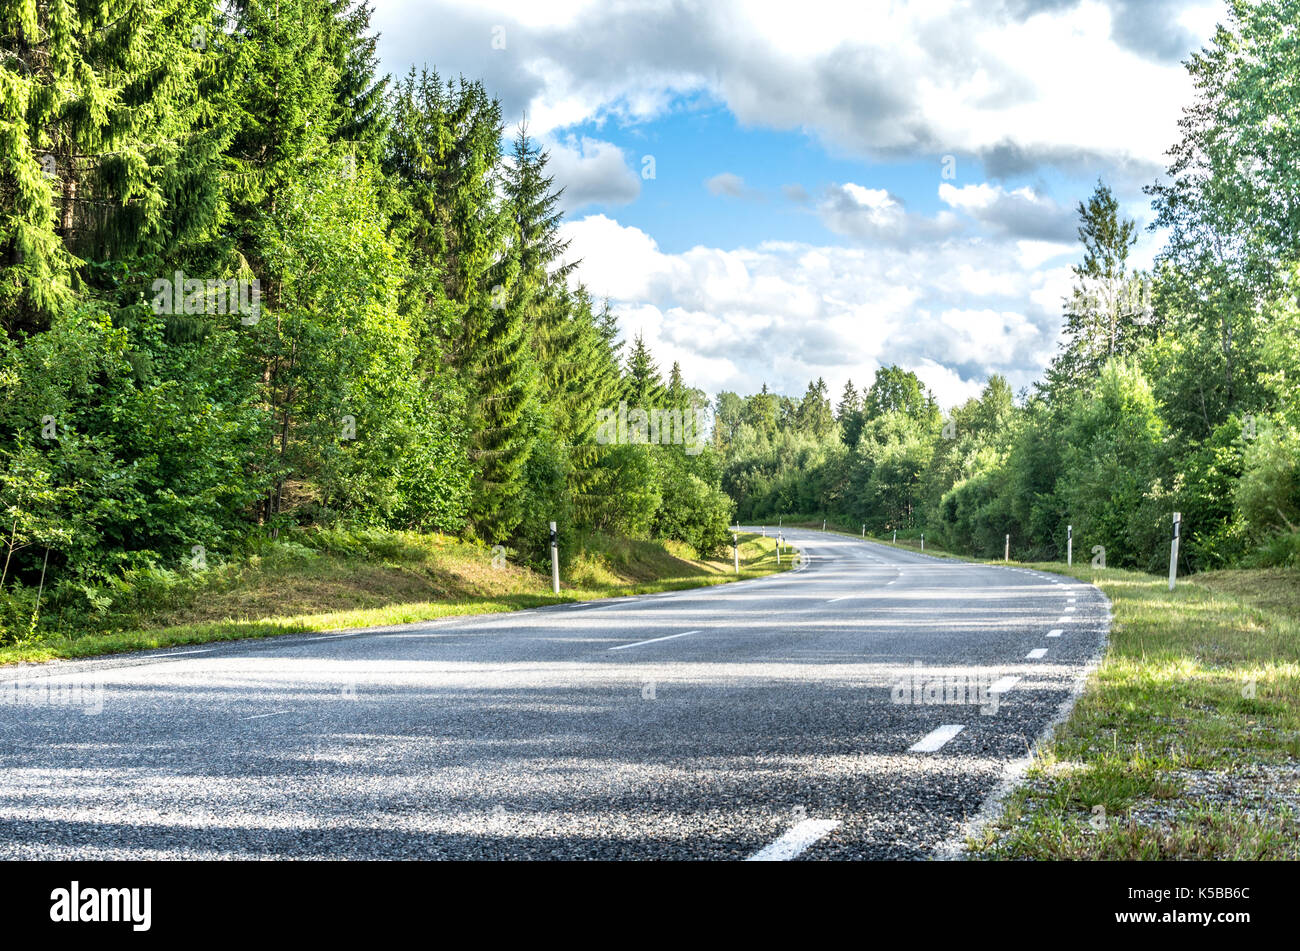 A road through a pine forest Stock Photo